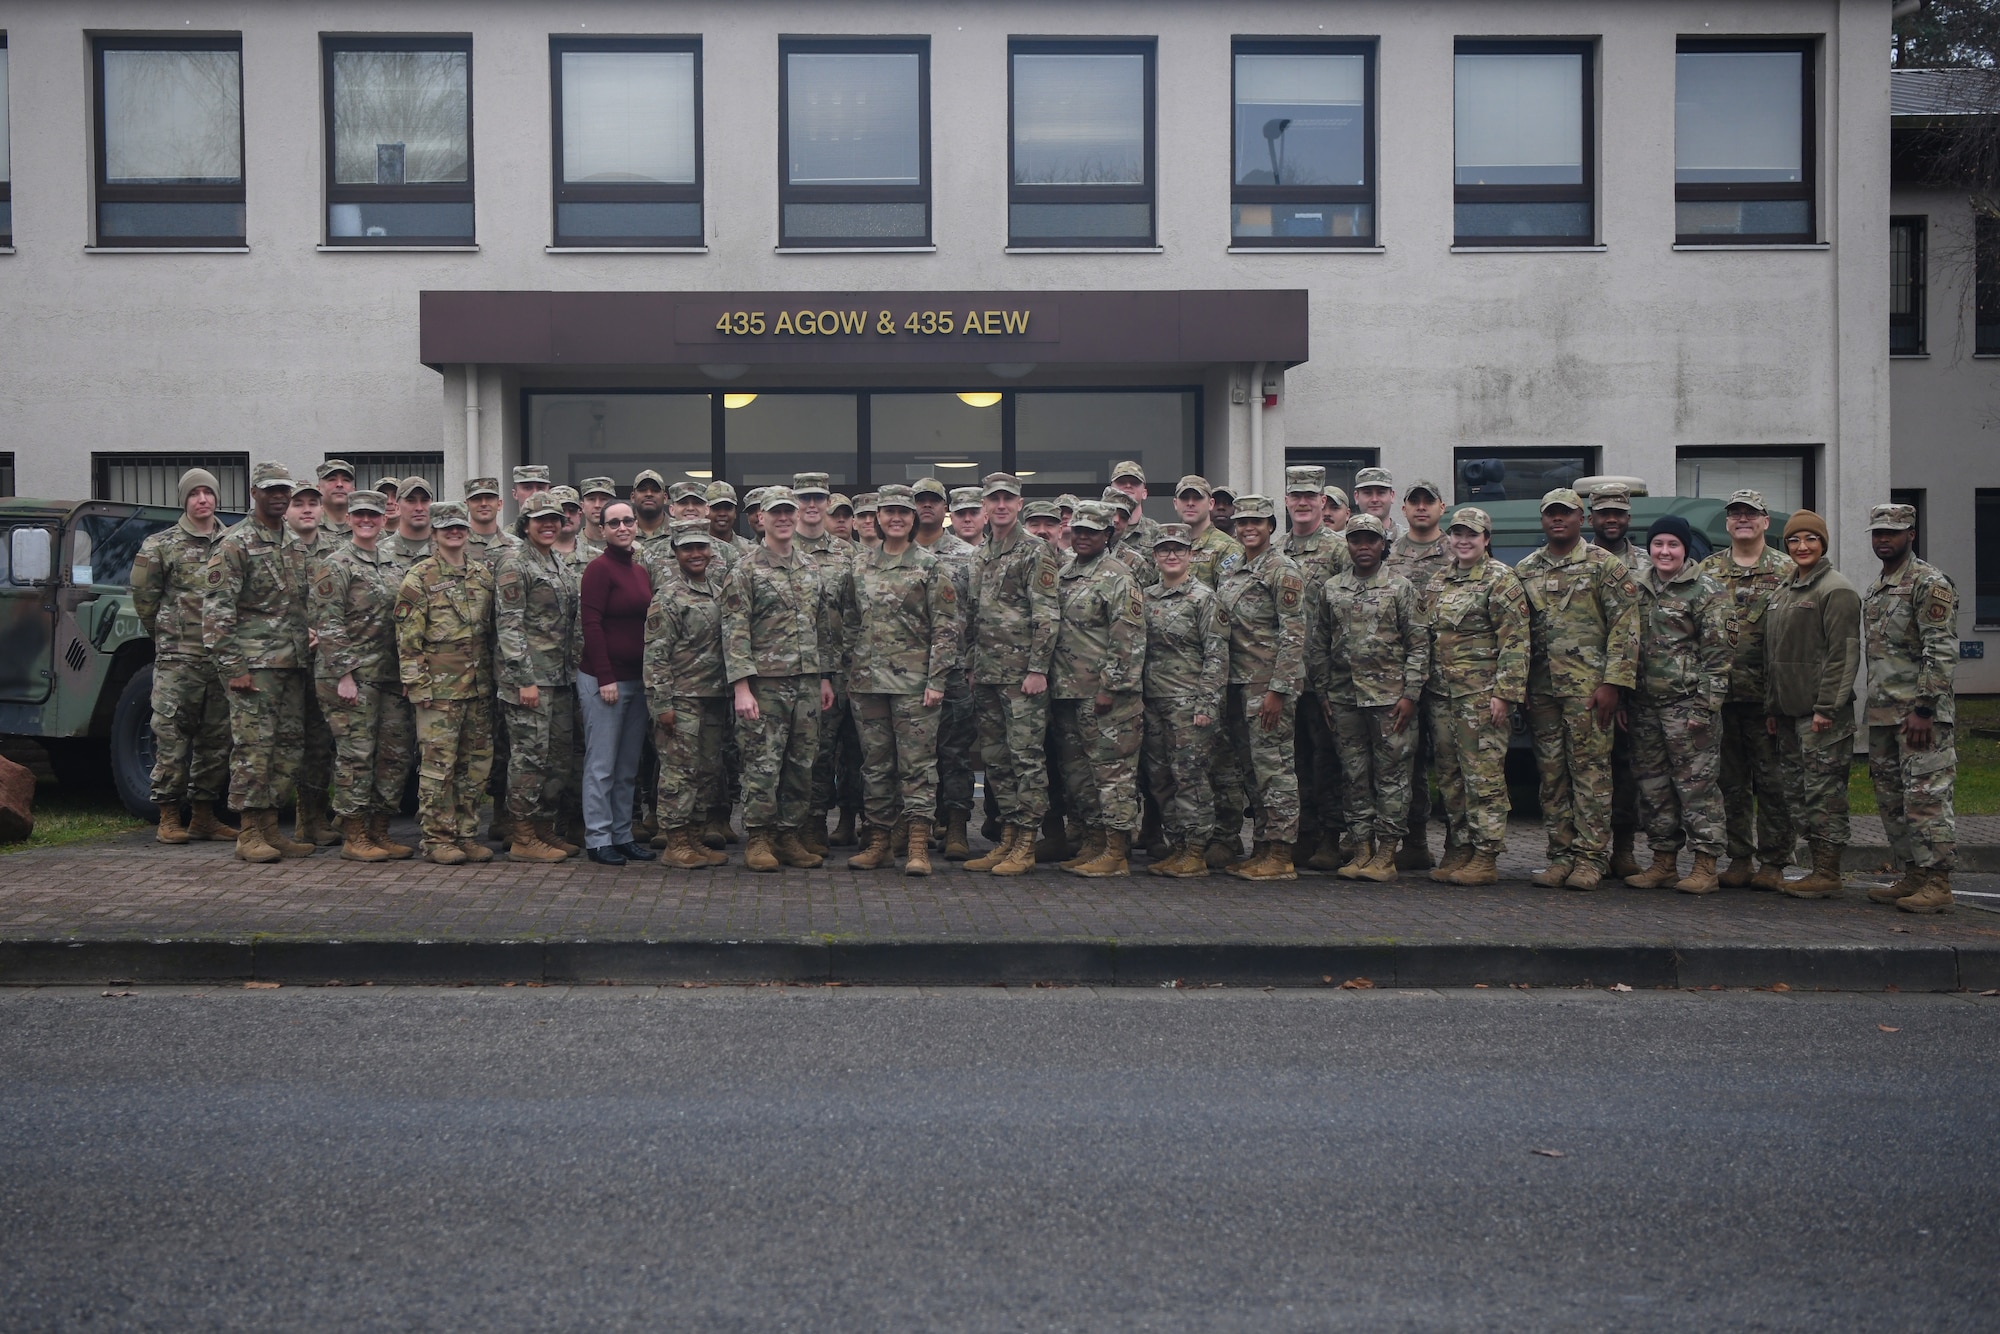 Chief Master Sgt. of the Air Force JoAnne S. Bass and Airmen from the 435th Air Expeditionary Wing (AEW) pose for a group photo at Ramstein Air Base, Germany, Dec. 19, 2021. The 435th AEW is the first and only air wing in Africa which provides secure, reliable, flexible expeditionary air power for combatant commanders. (U.S. Air Force photo by Senior Airman Ericka A. Woolever)